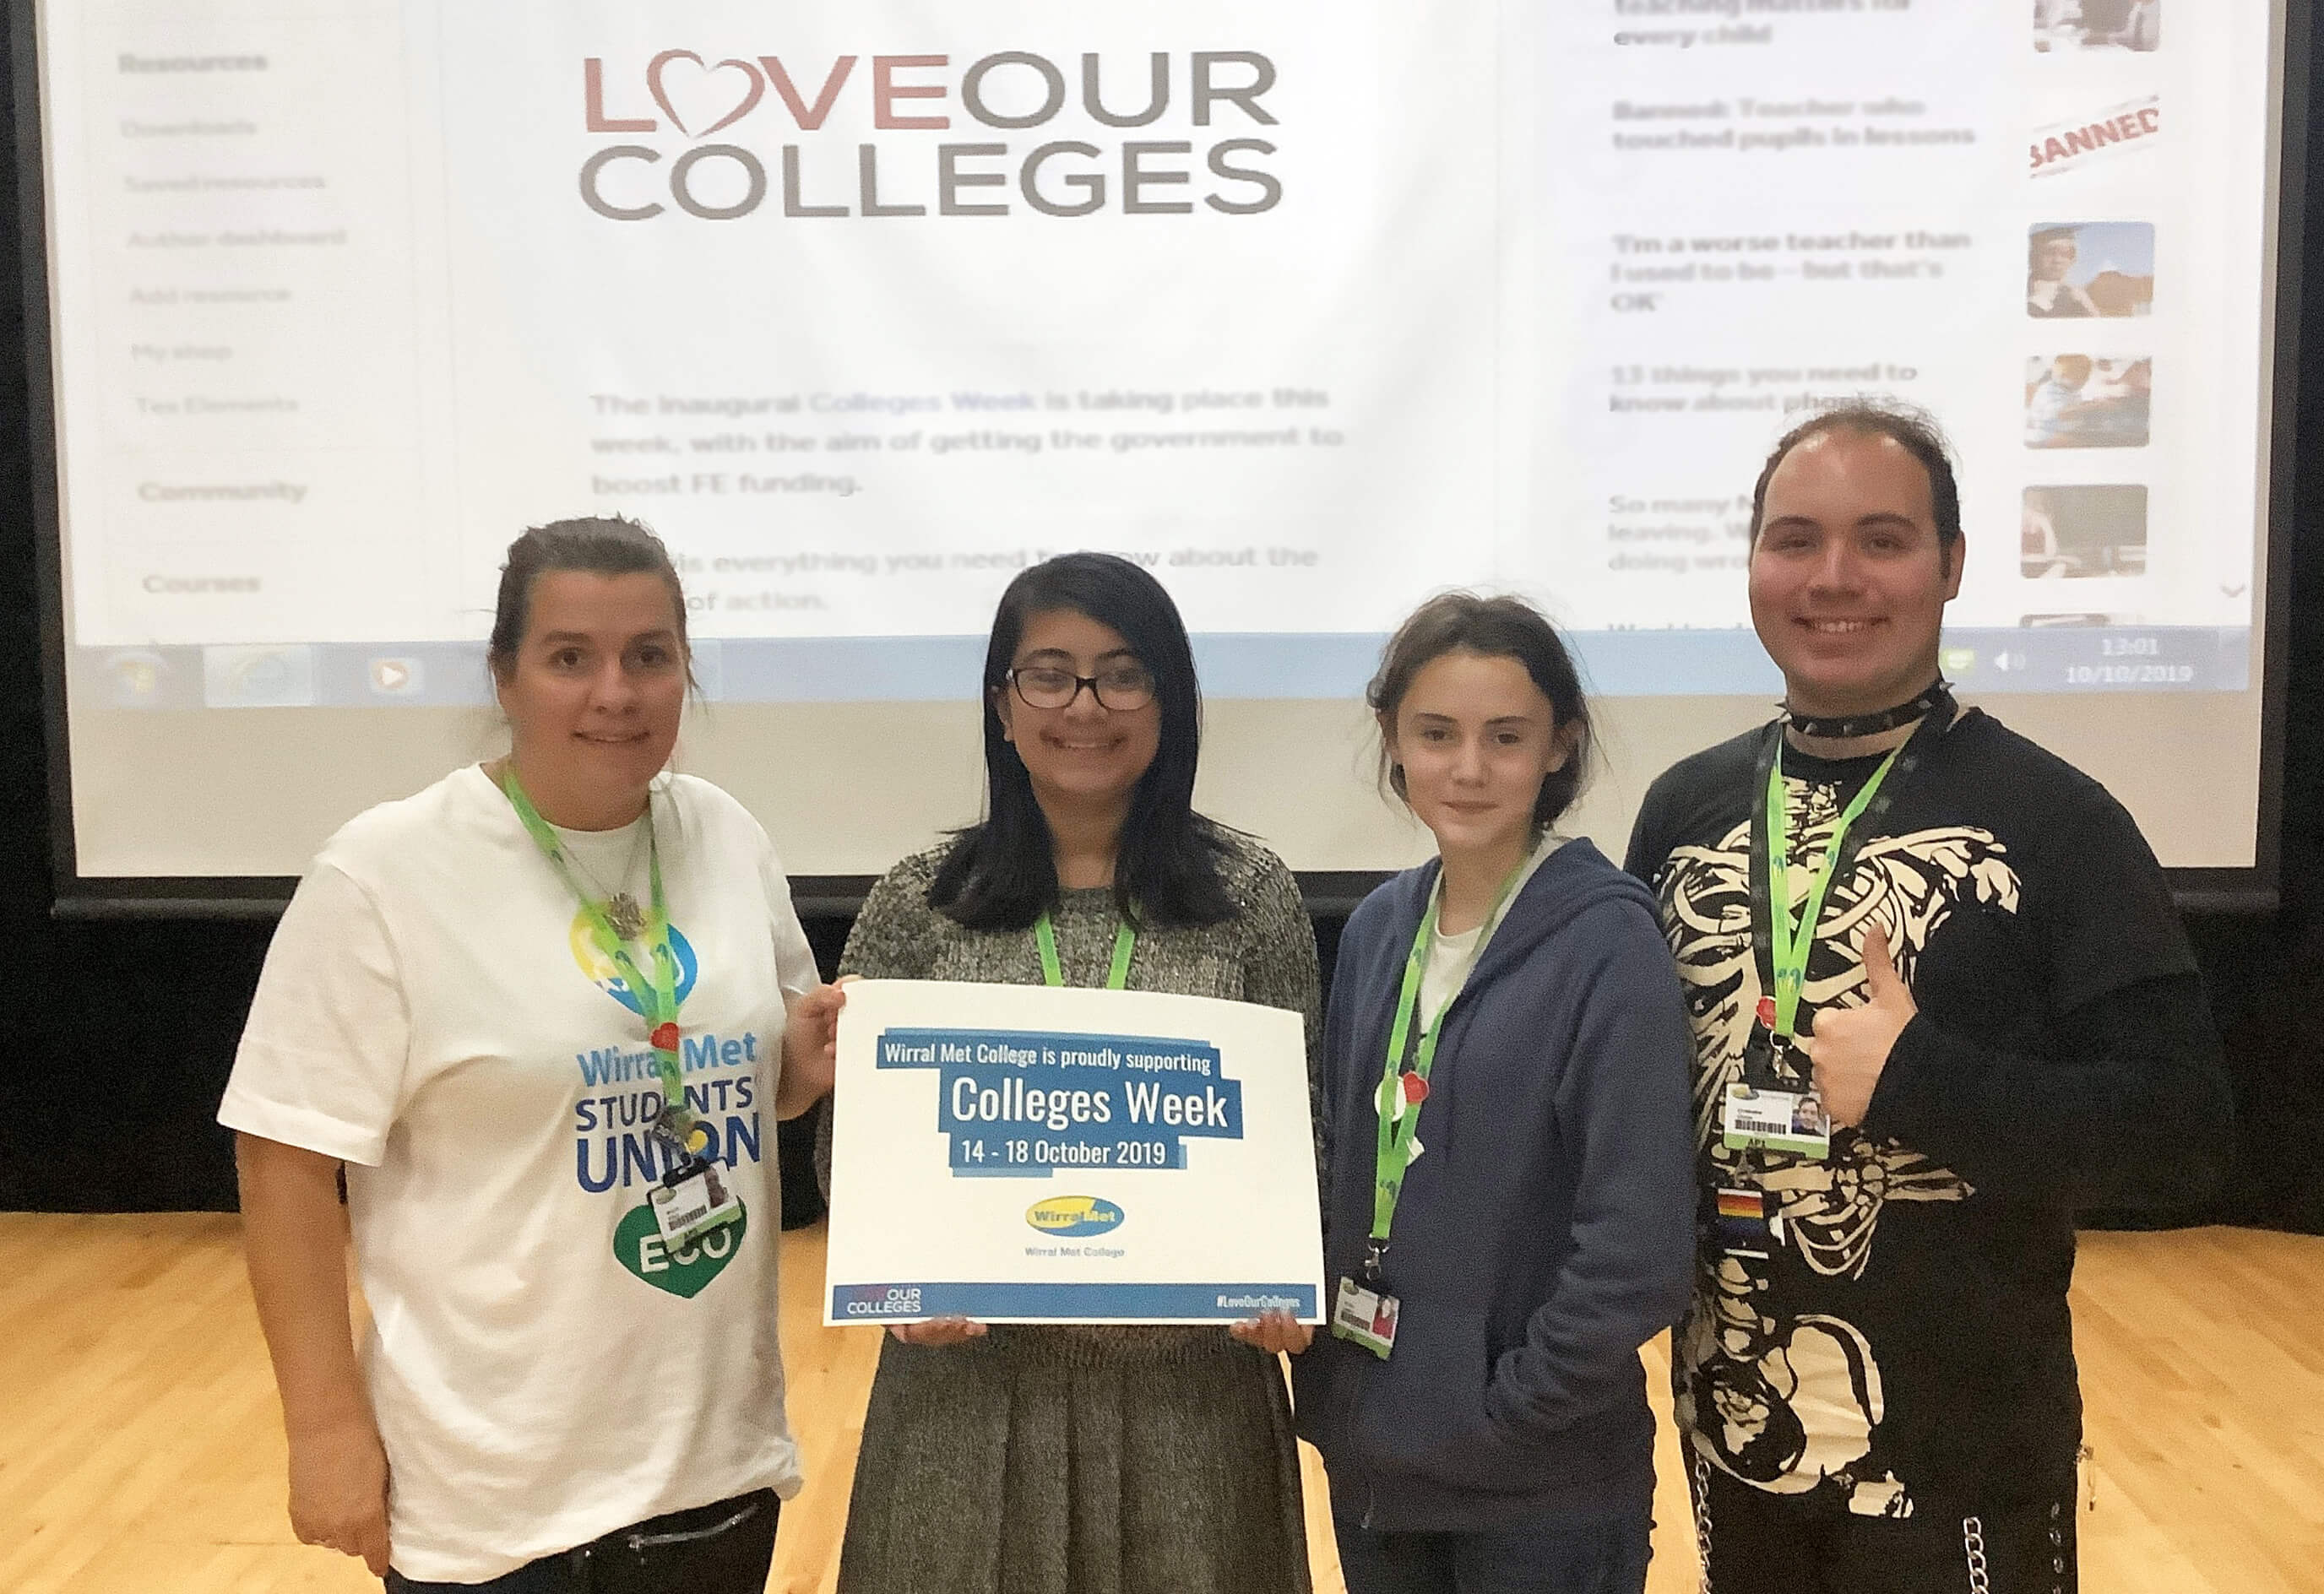 Wirral Met College launches Love Our Colleges video competition 2020